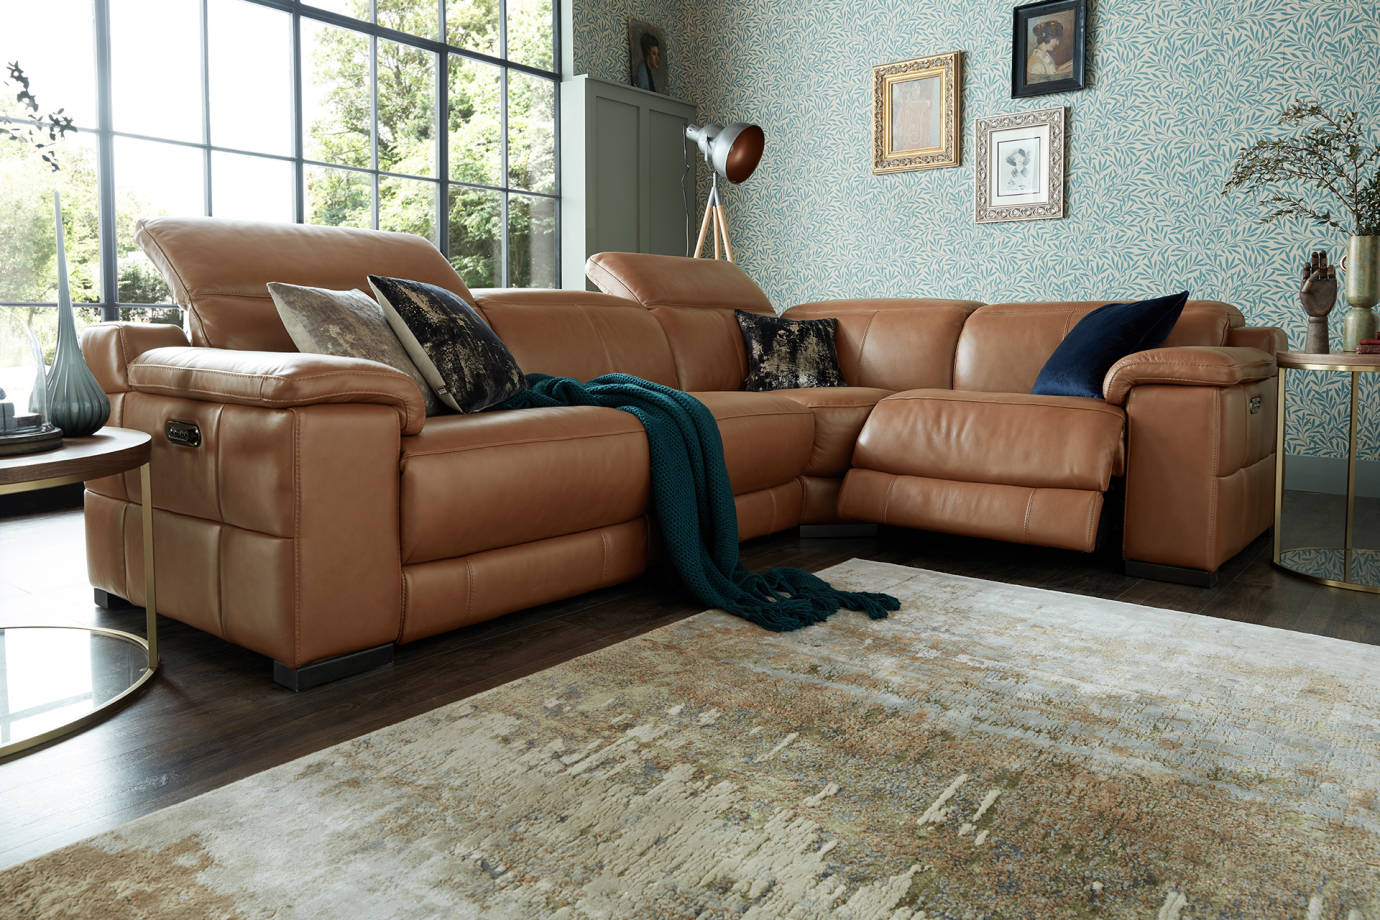 Recliner Sofas Leather Fabric And, Tan Leather Sofa Recliner